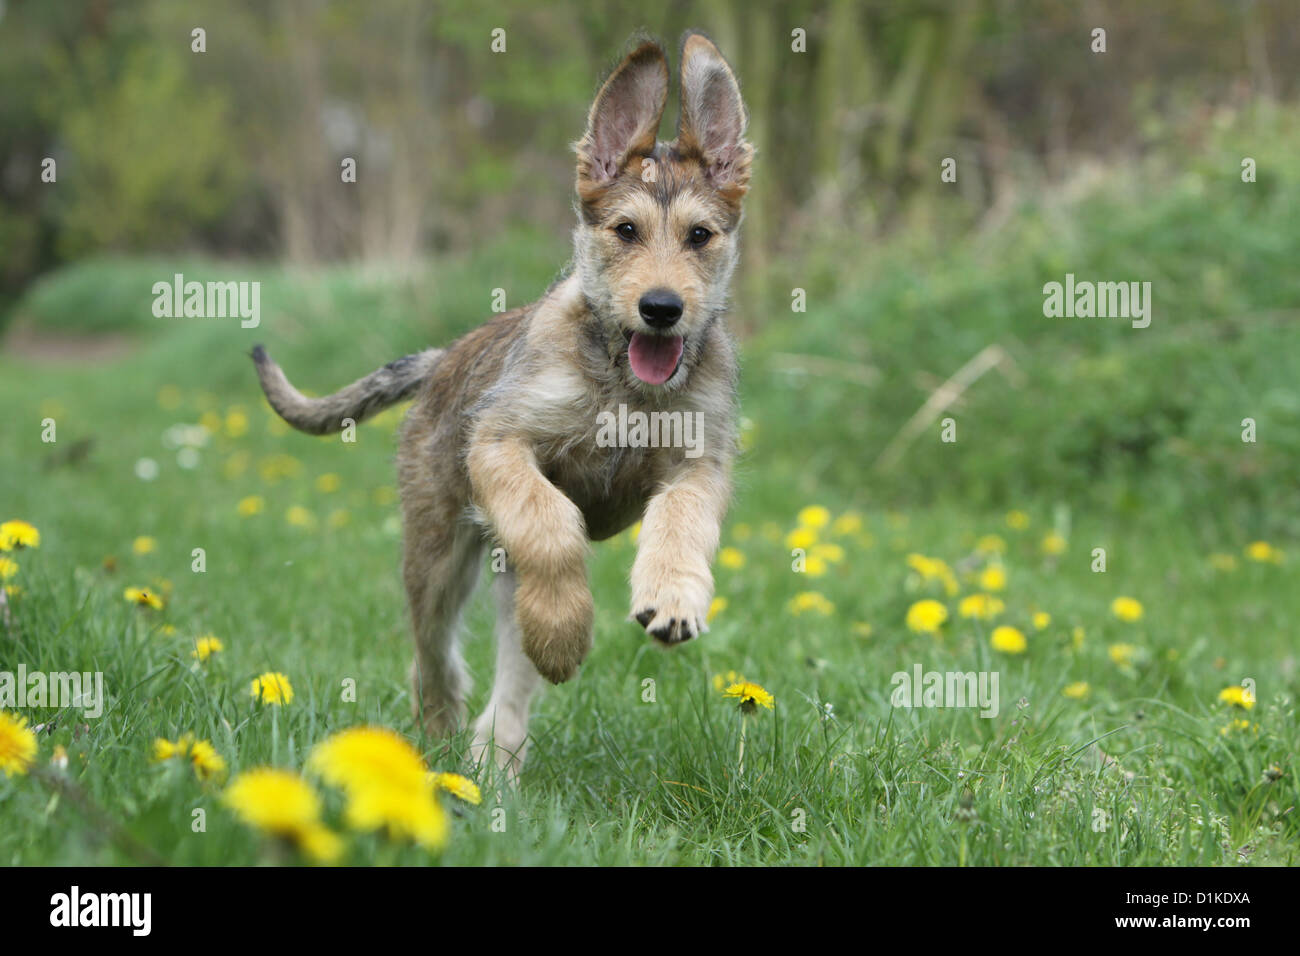 Dog Berger Picard /  Picardy Shepherd puppy running in a meadow Stock Photo